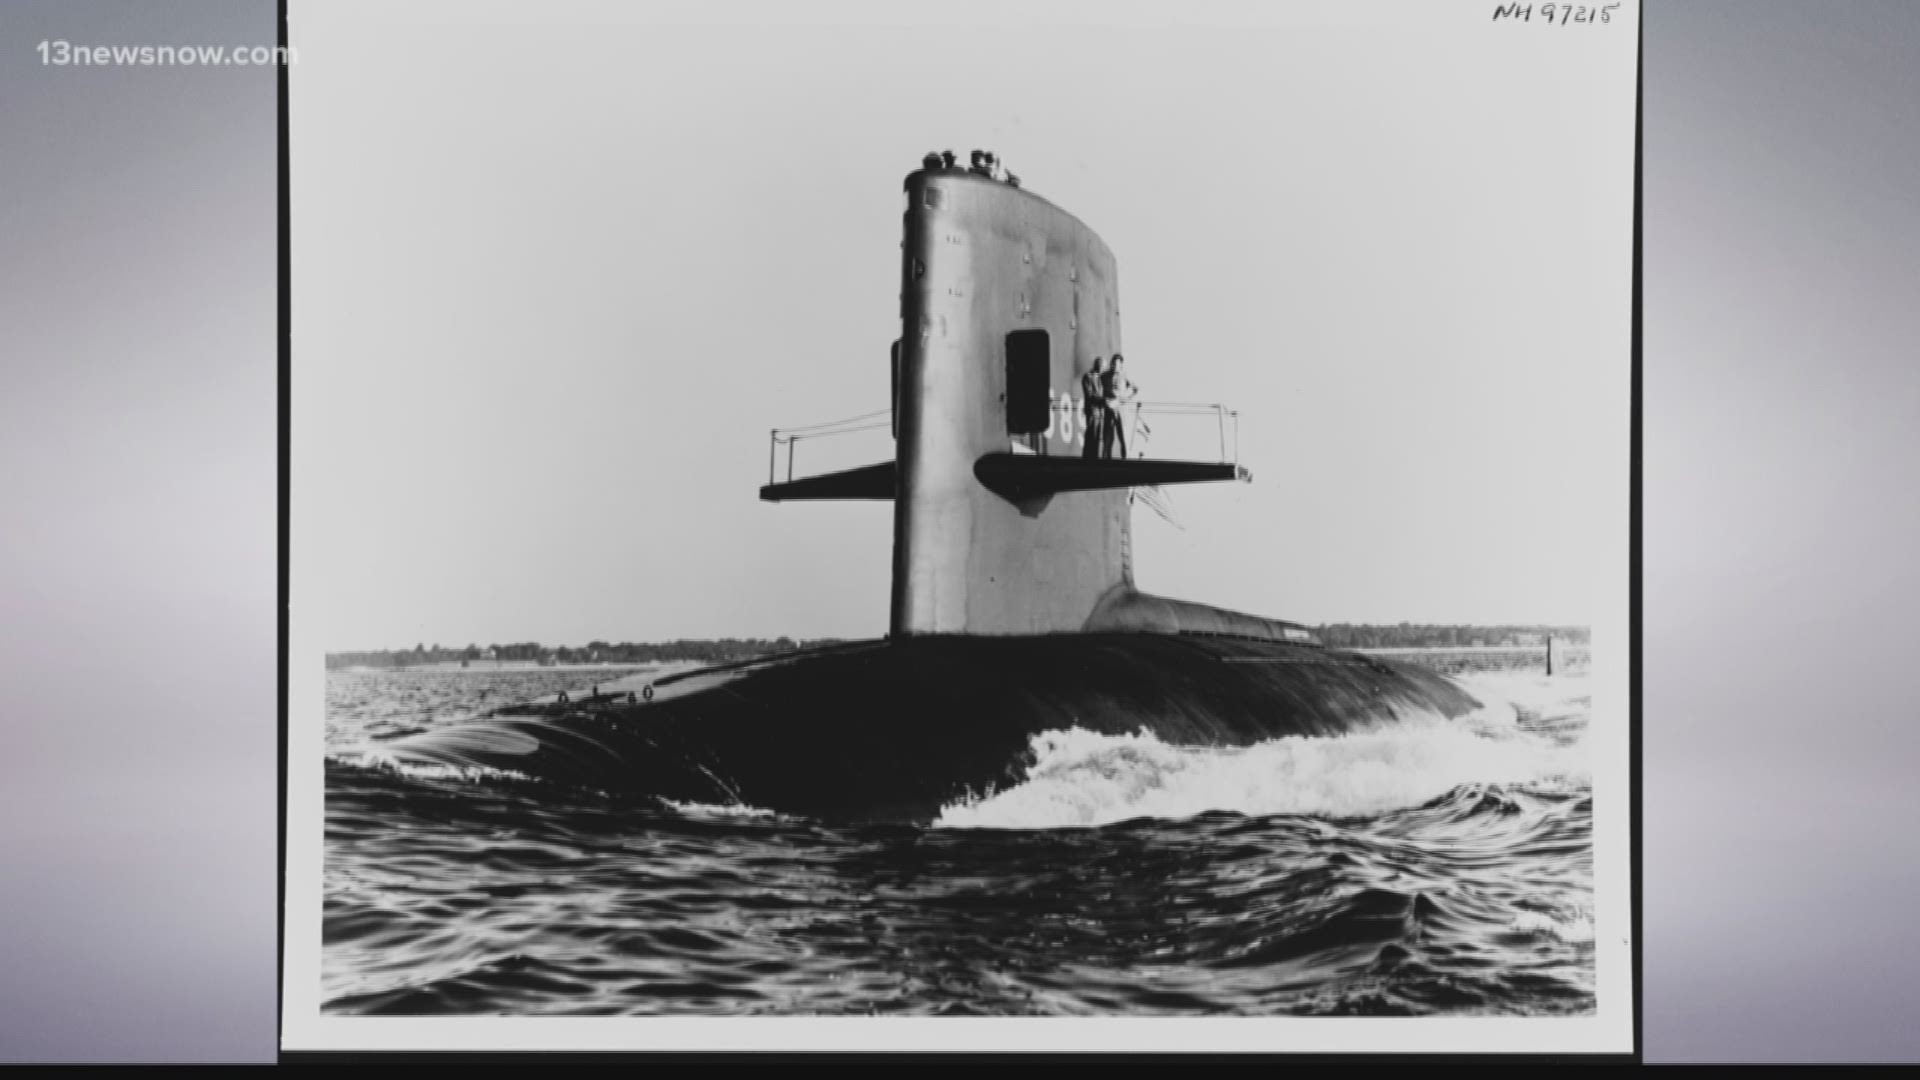 Tomorrow marks 50-years since the Norfolk-based submarine USS Scorpion vanished, taking all 99-crewmen with her.